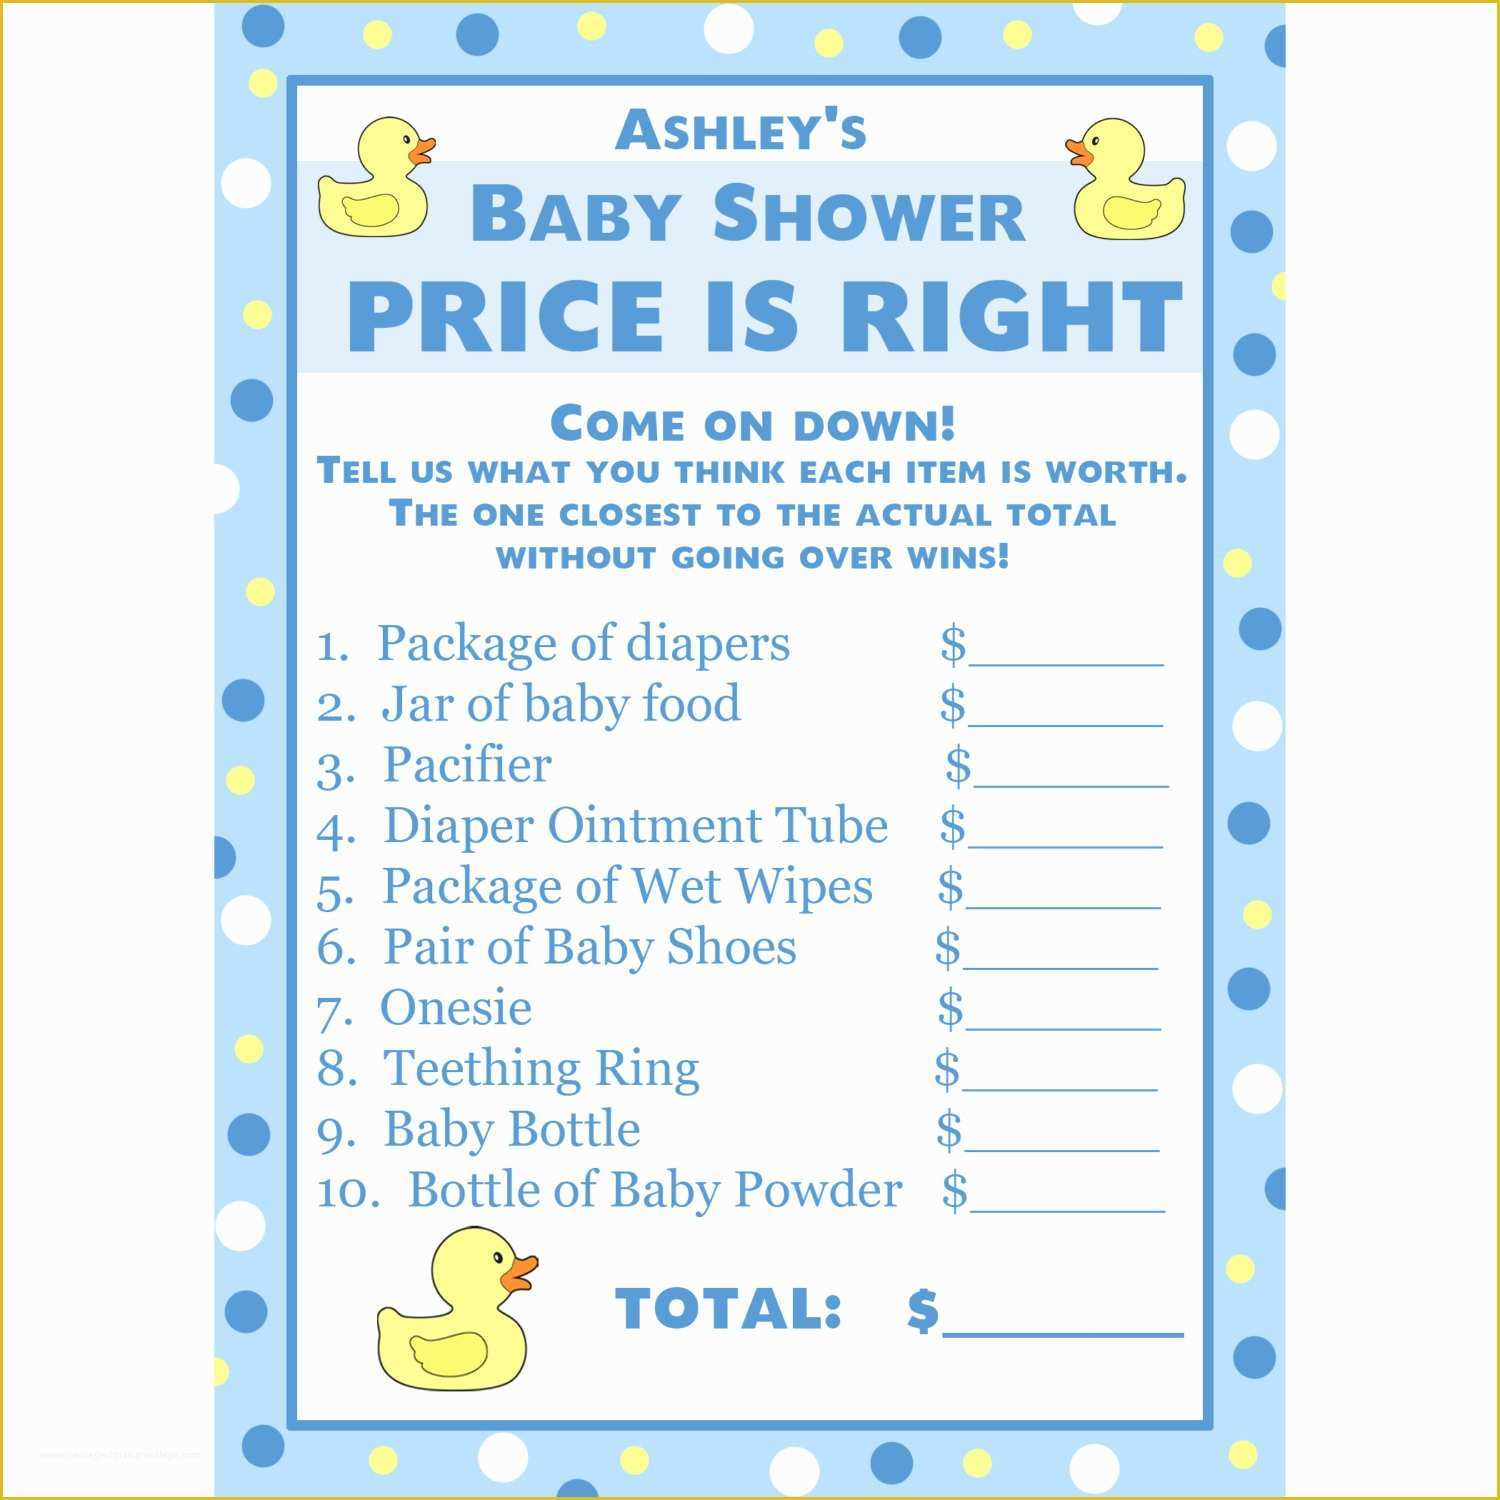 Price is Right Baby Shower Game Free Template Of 24 Personalized Baby Shower Price is Right Game Cards Blue